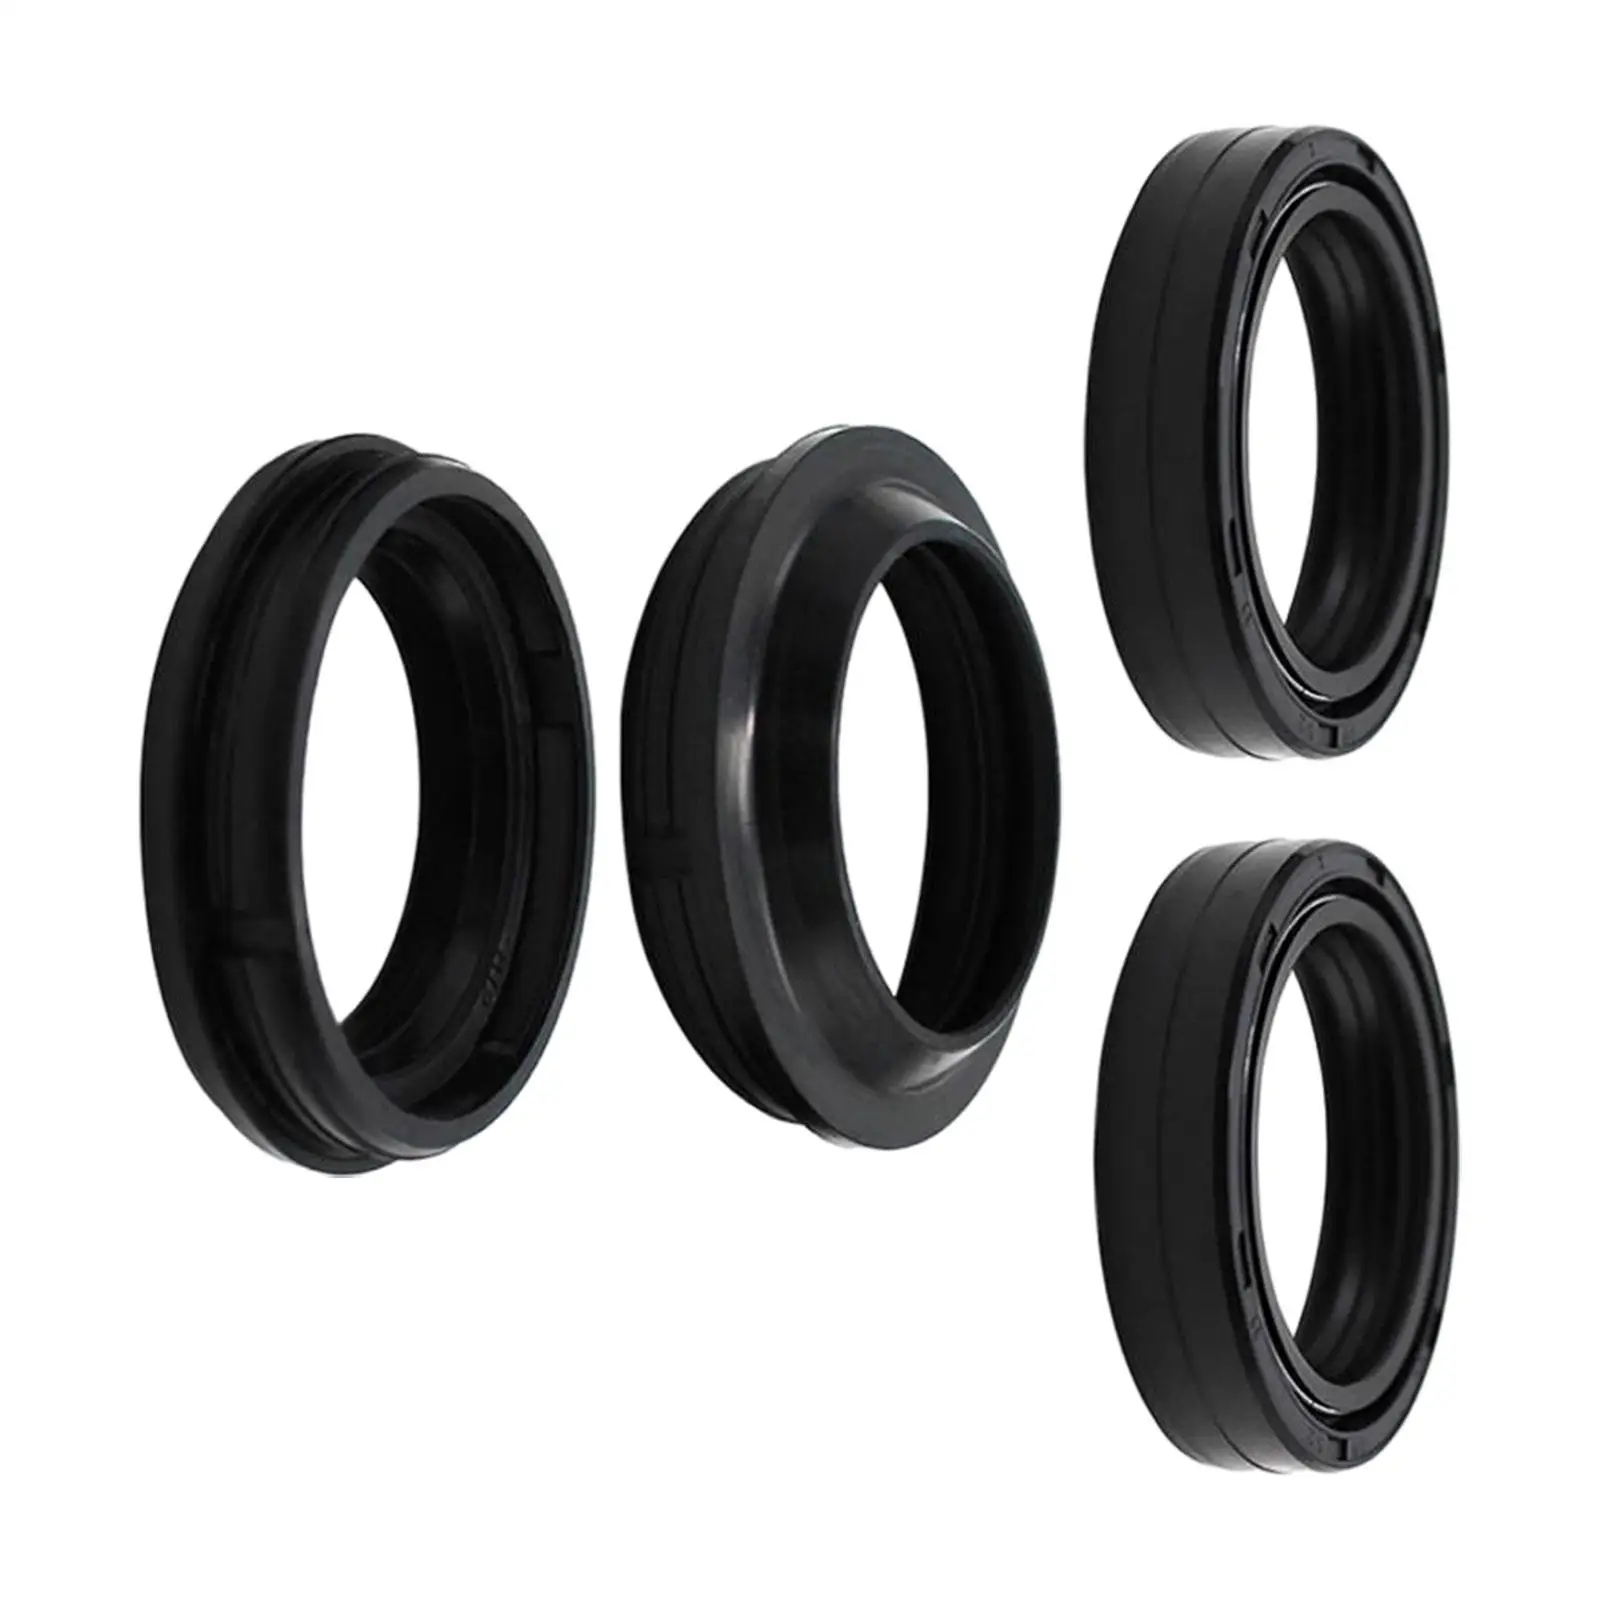 4x Motorcycle Front Fork Damper Oil Seal and Dust Seal 36x48x11mm Wear Resistance for Yamaha XT 125 R Bra 2007 1D4-f2480-00